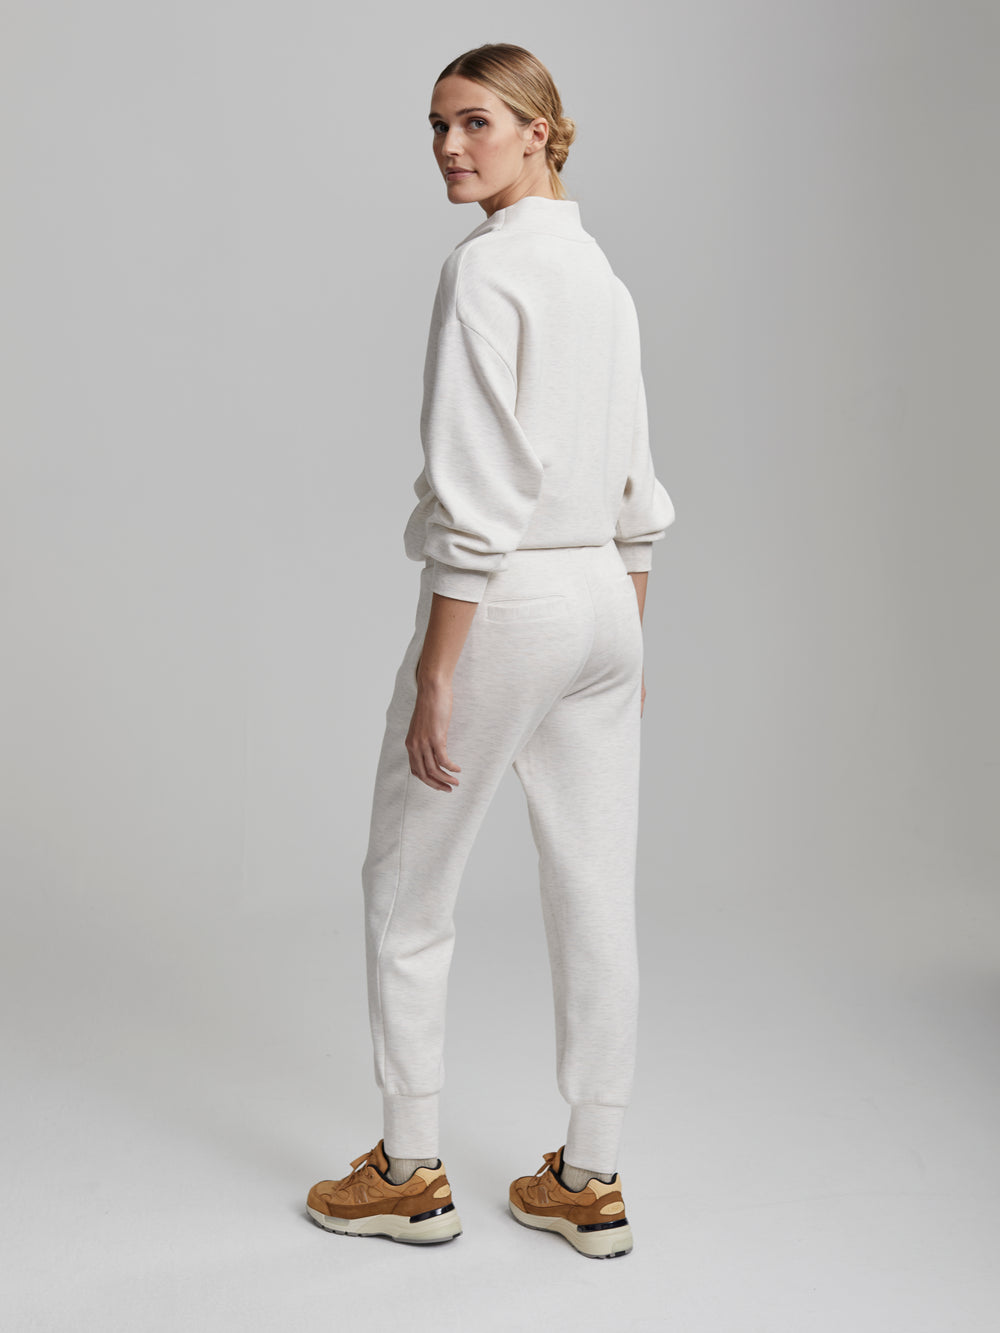 VARLEY  The Slim Cuff Pant 27.5 - Ivory Marl – madaboutstyle